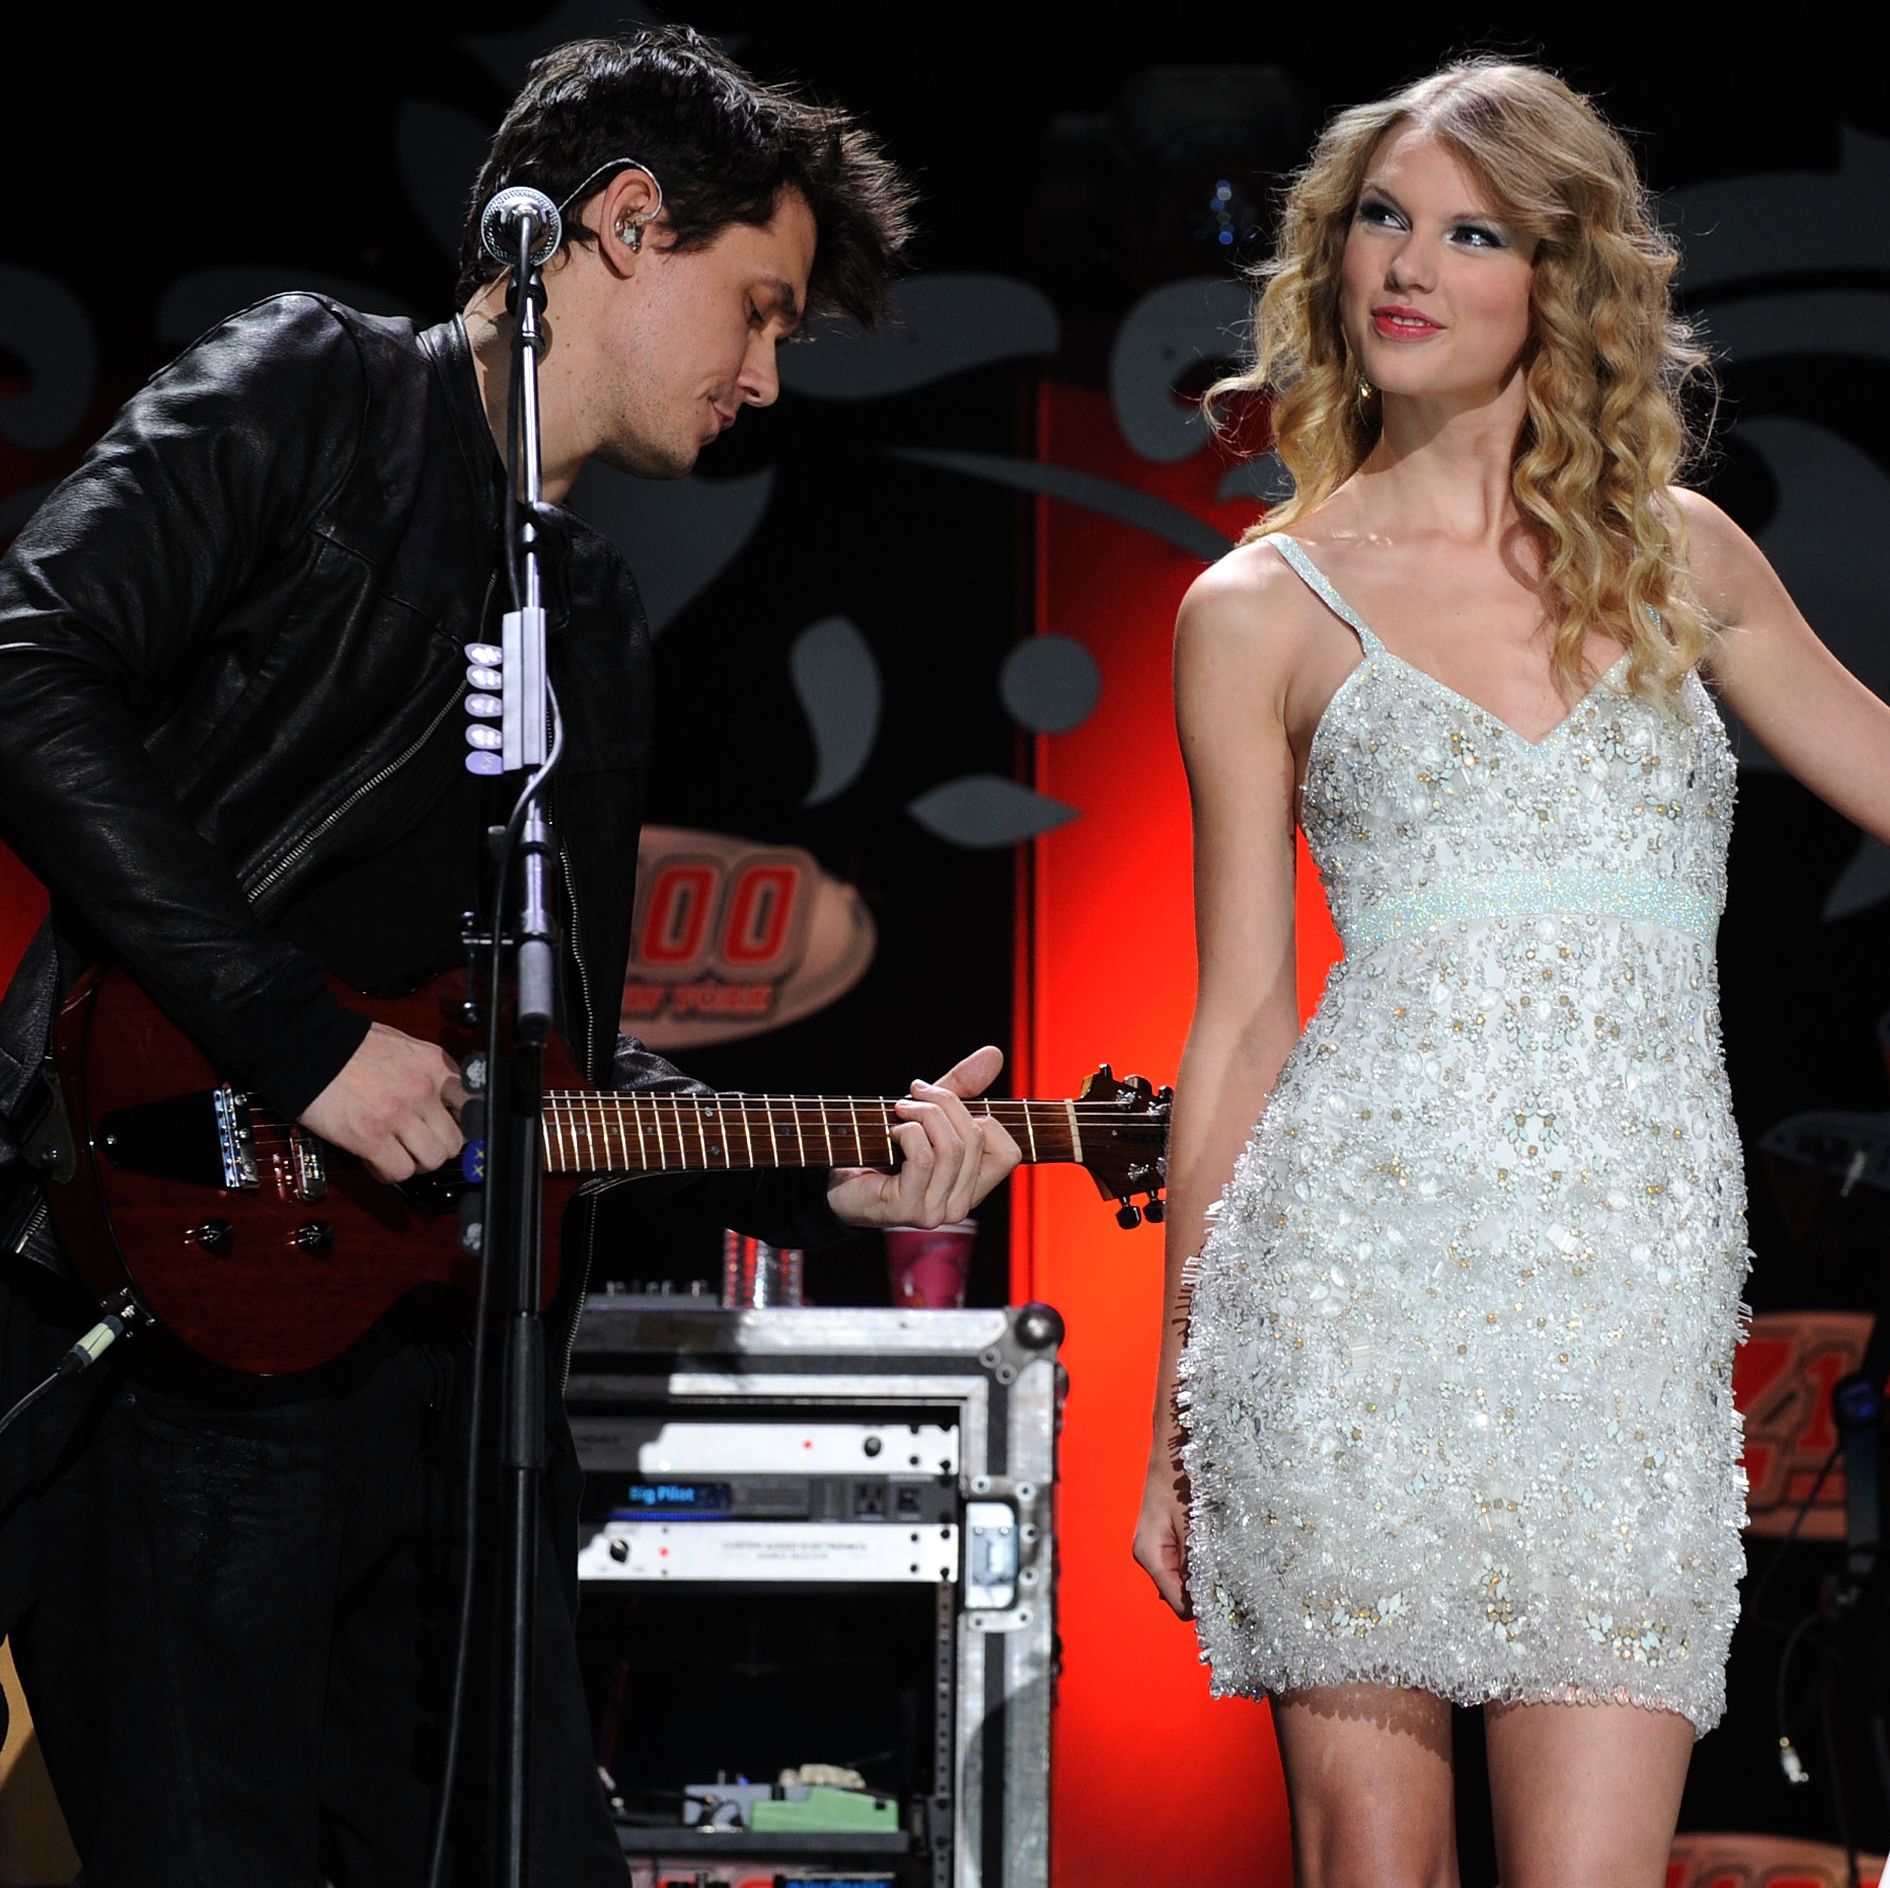 Taylor Swift Asked Fans Not to Cyberbully John Mayer Before Playing 